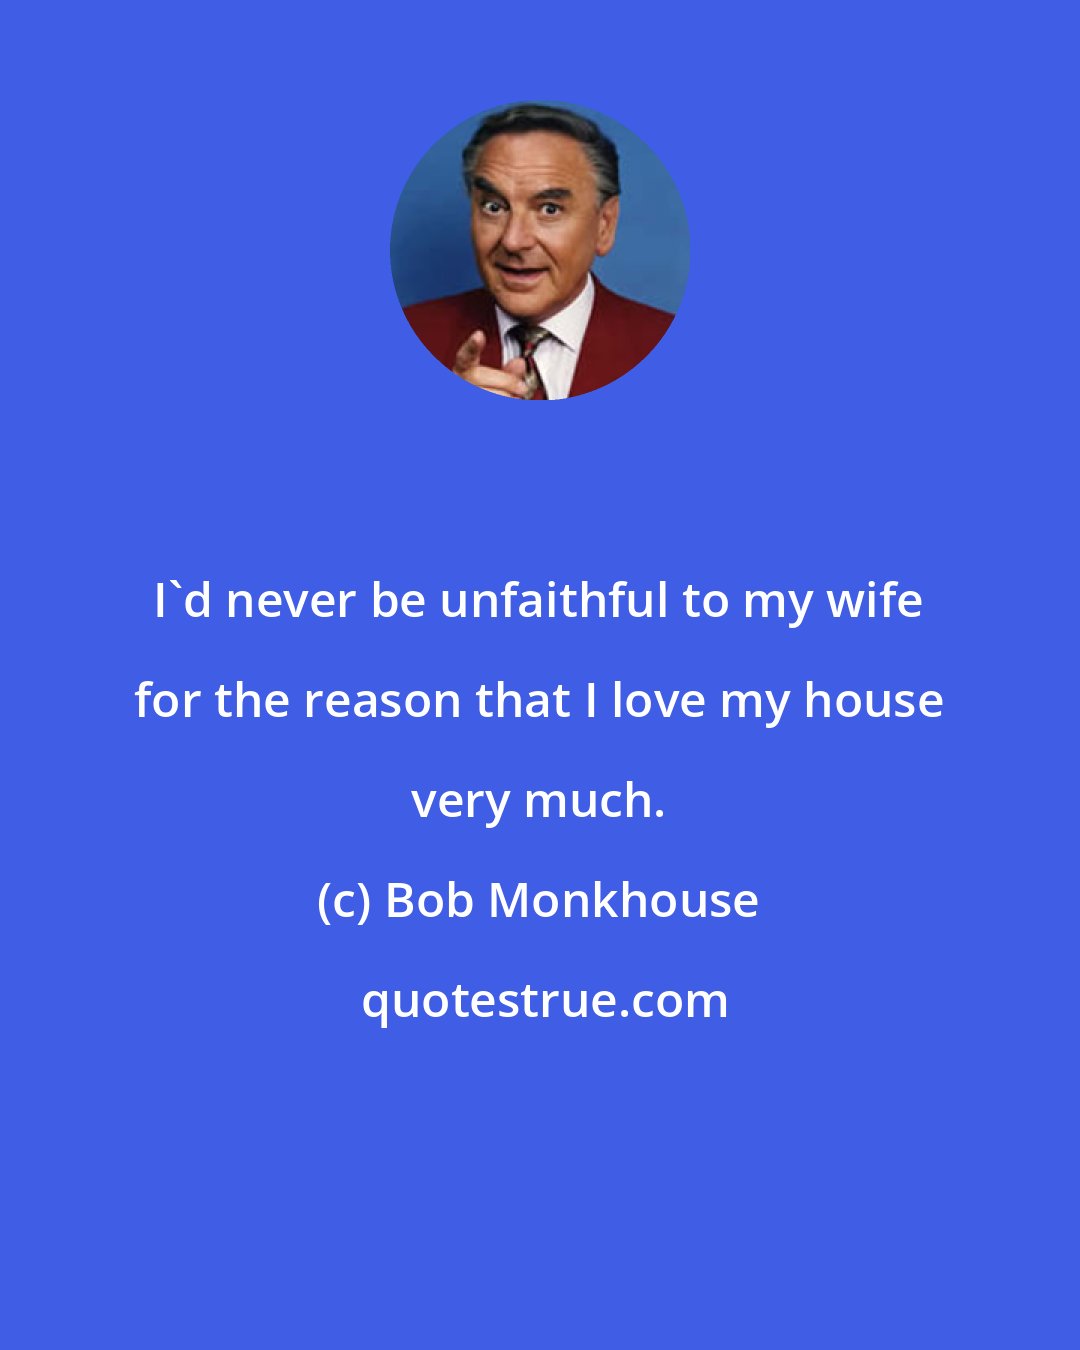 Bob Monkhouse: I'd never be unfaithful to my wife for the reason that I love my house very much.